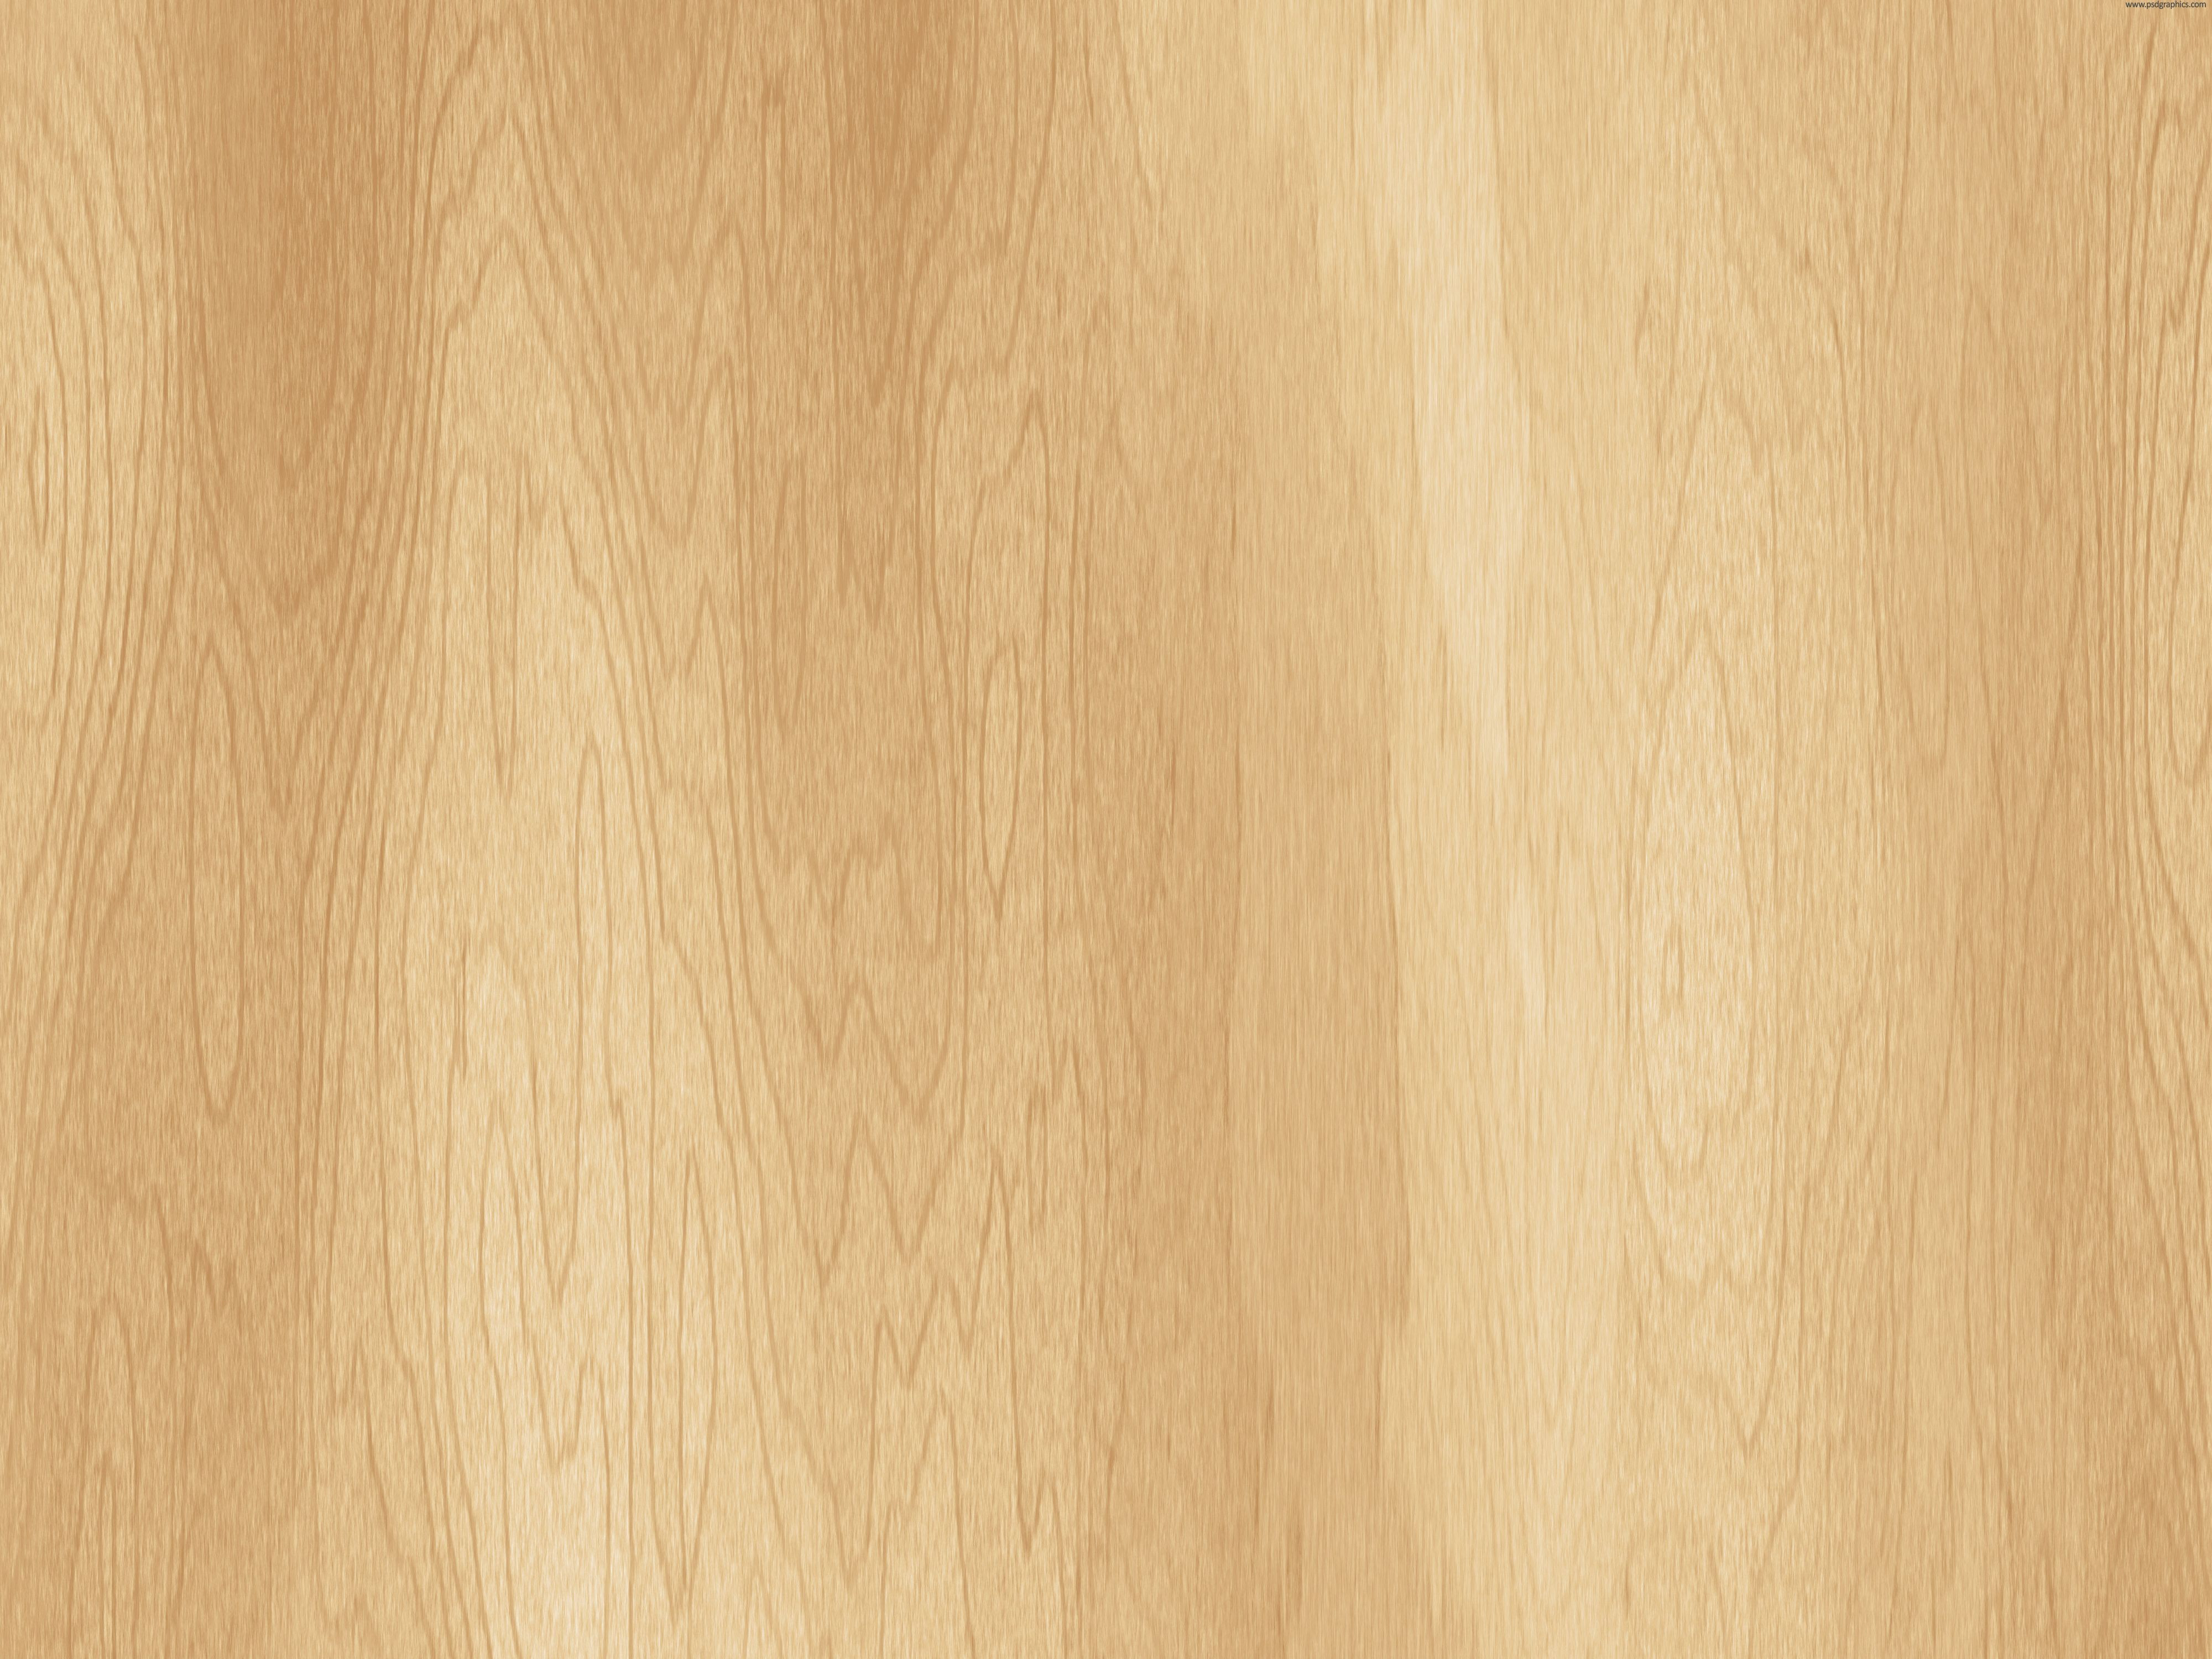 What&amp;#039;s the Average Cost to Refinish Hardwood Floors Of View source Image Vbs Pinterest Wooden Background Wood Pertaining to View source Image Light Wood Background Panda Background Background Colour Vector Background